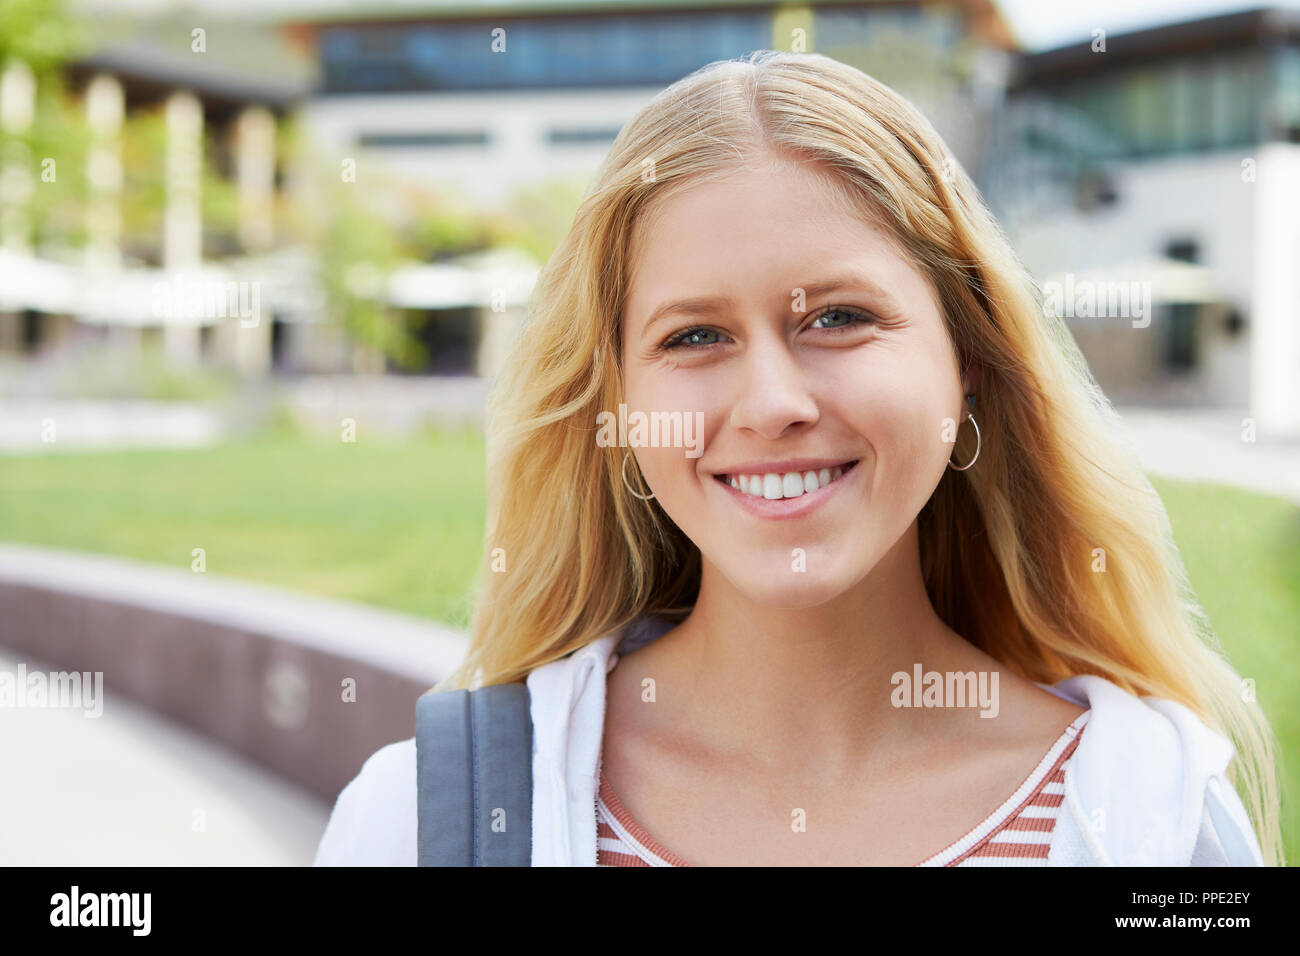 Portrait Of Female High School Student Outside College Buildings Stock Photo